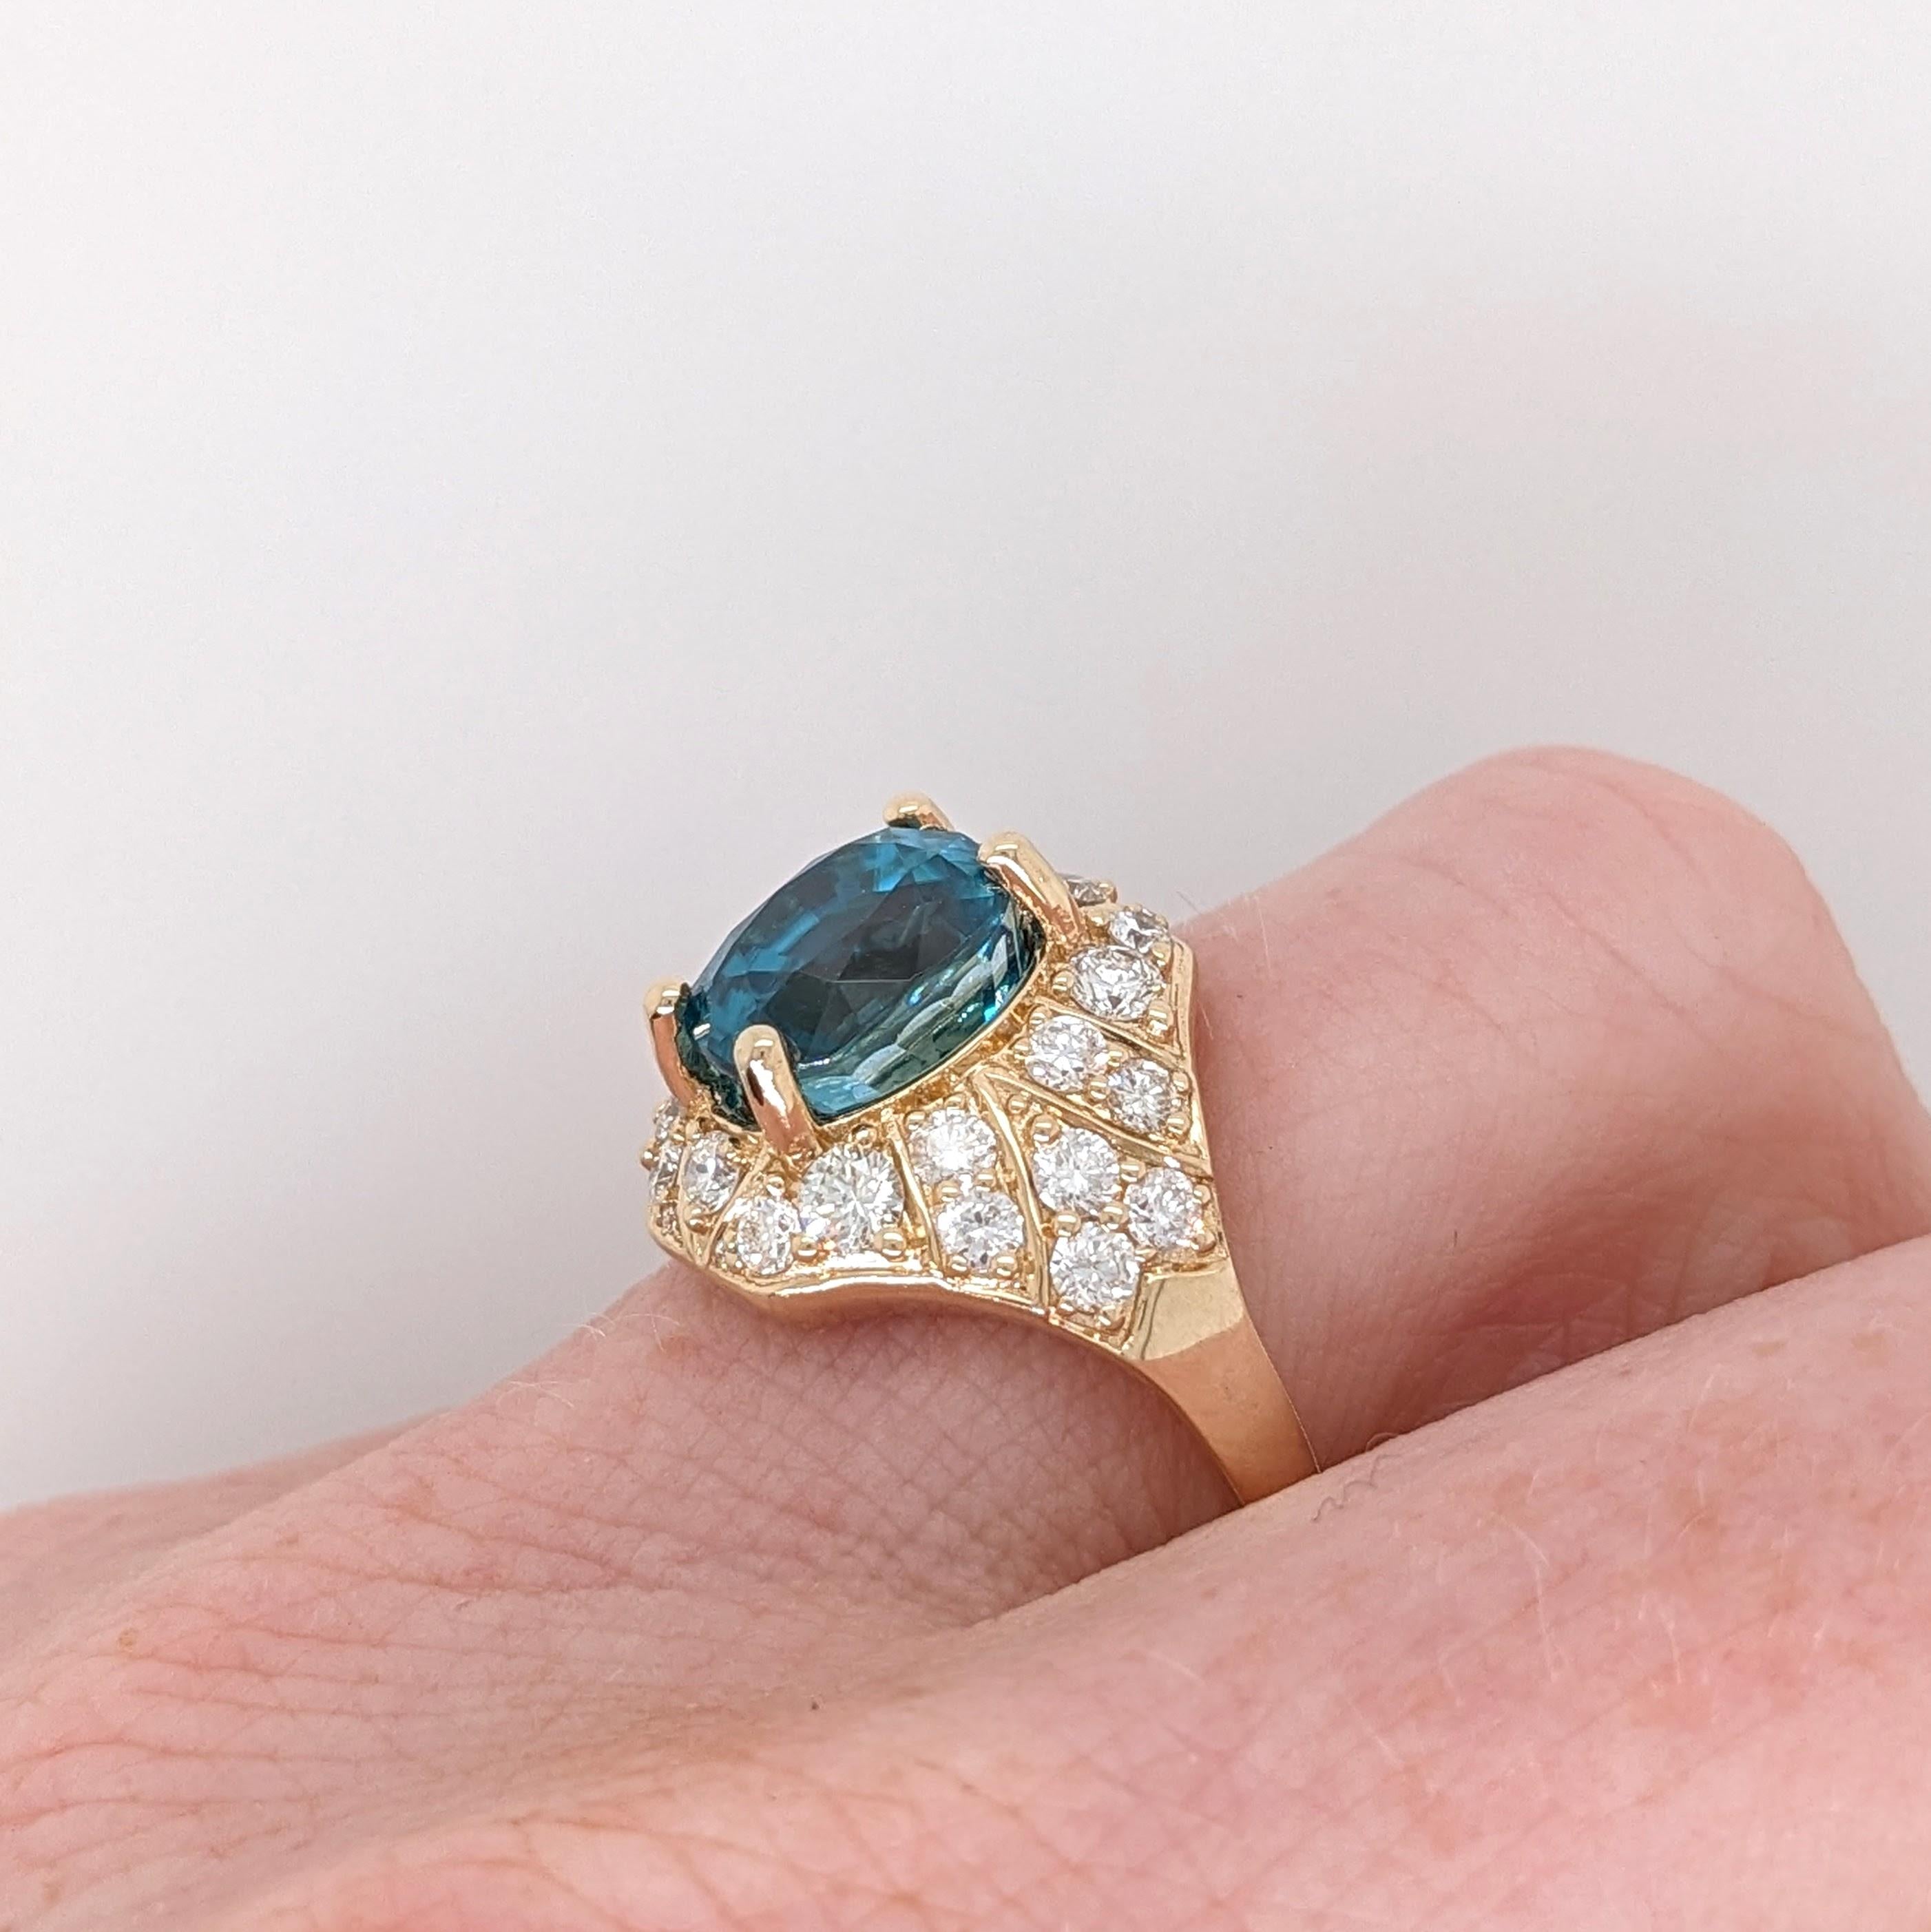 5.2ct Blue Zircon Ring w Natural Diamonds in Solid 14K Yellow Gold Oval 10x8mm